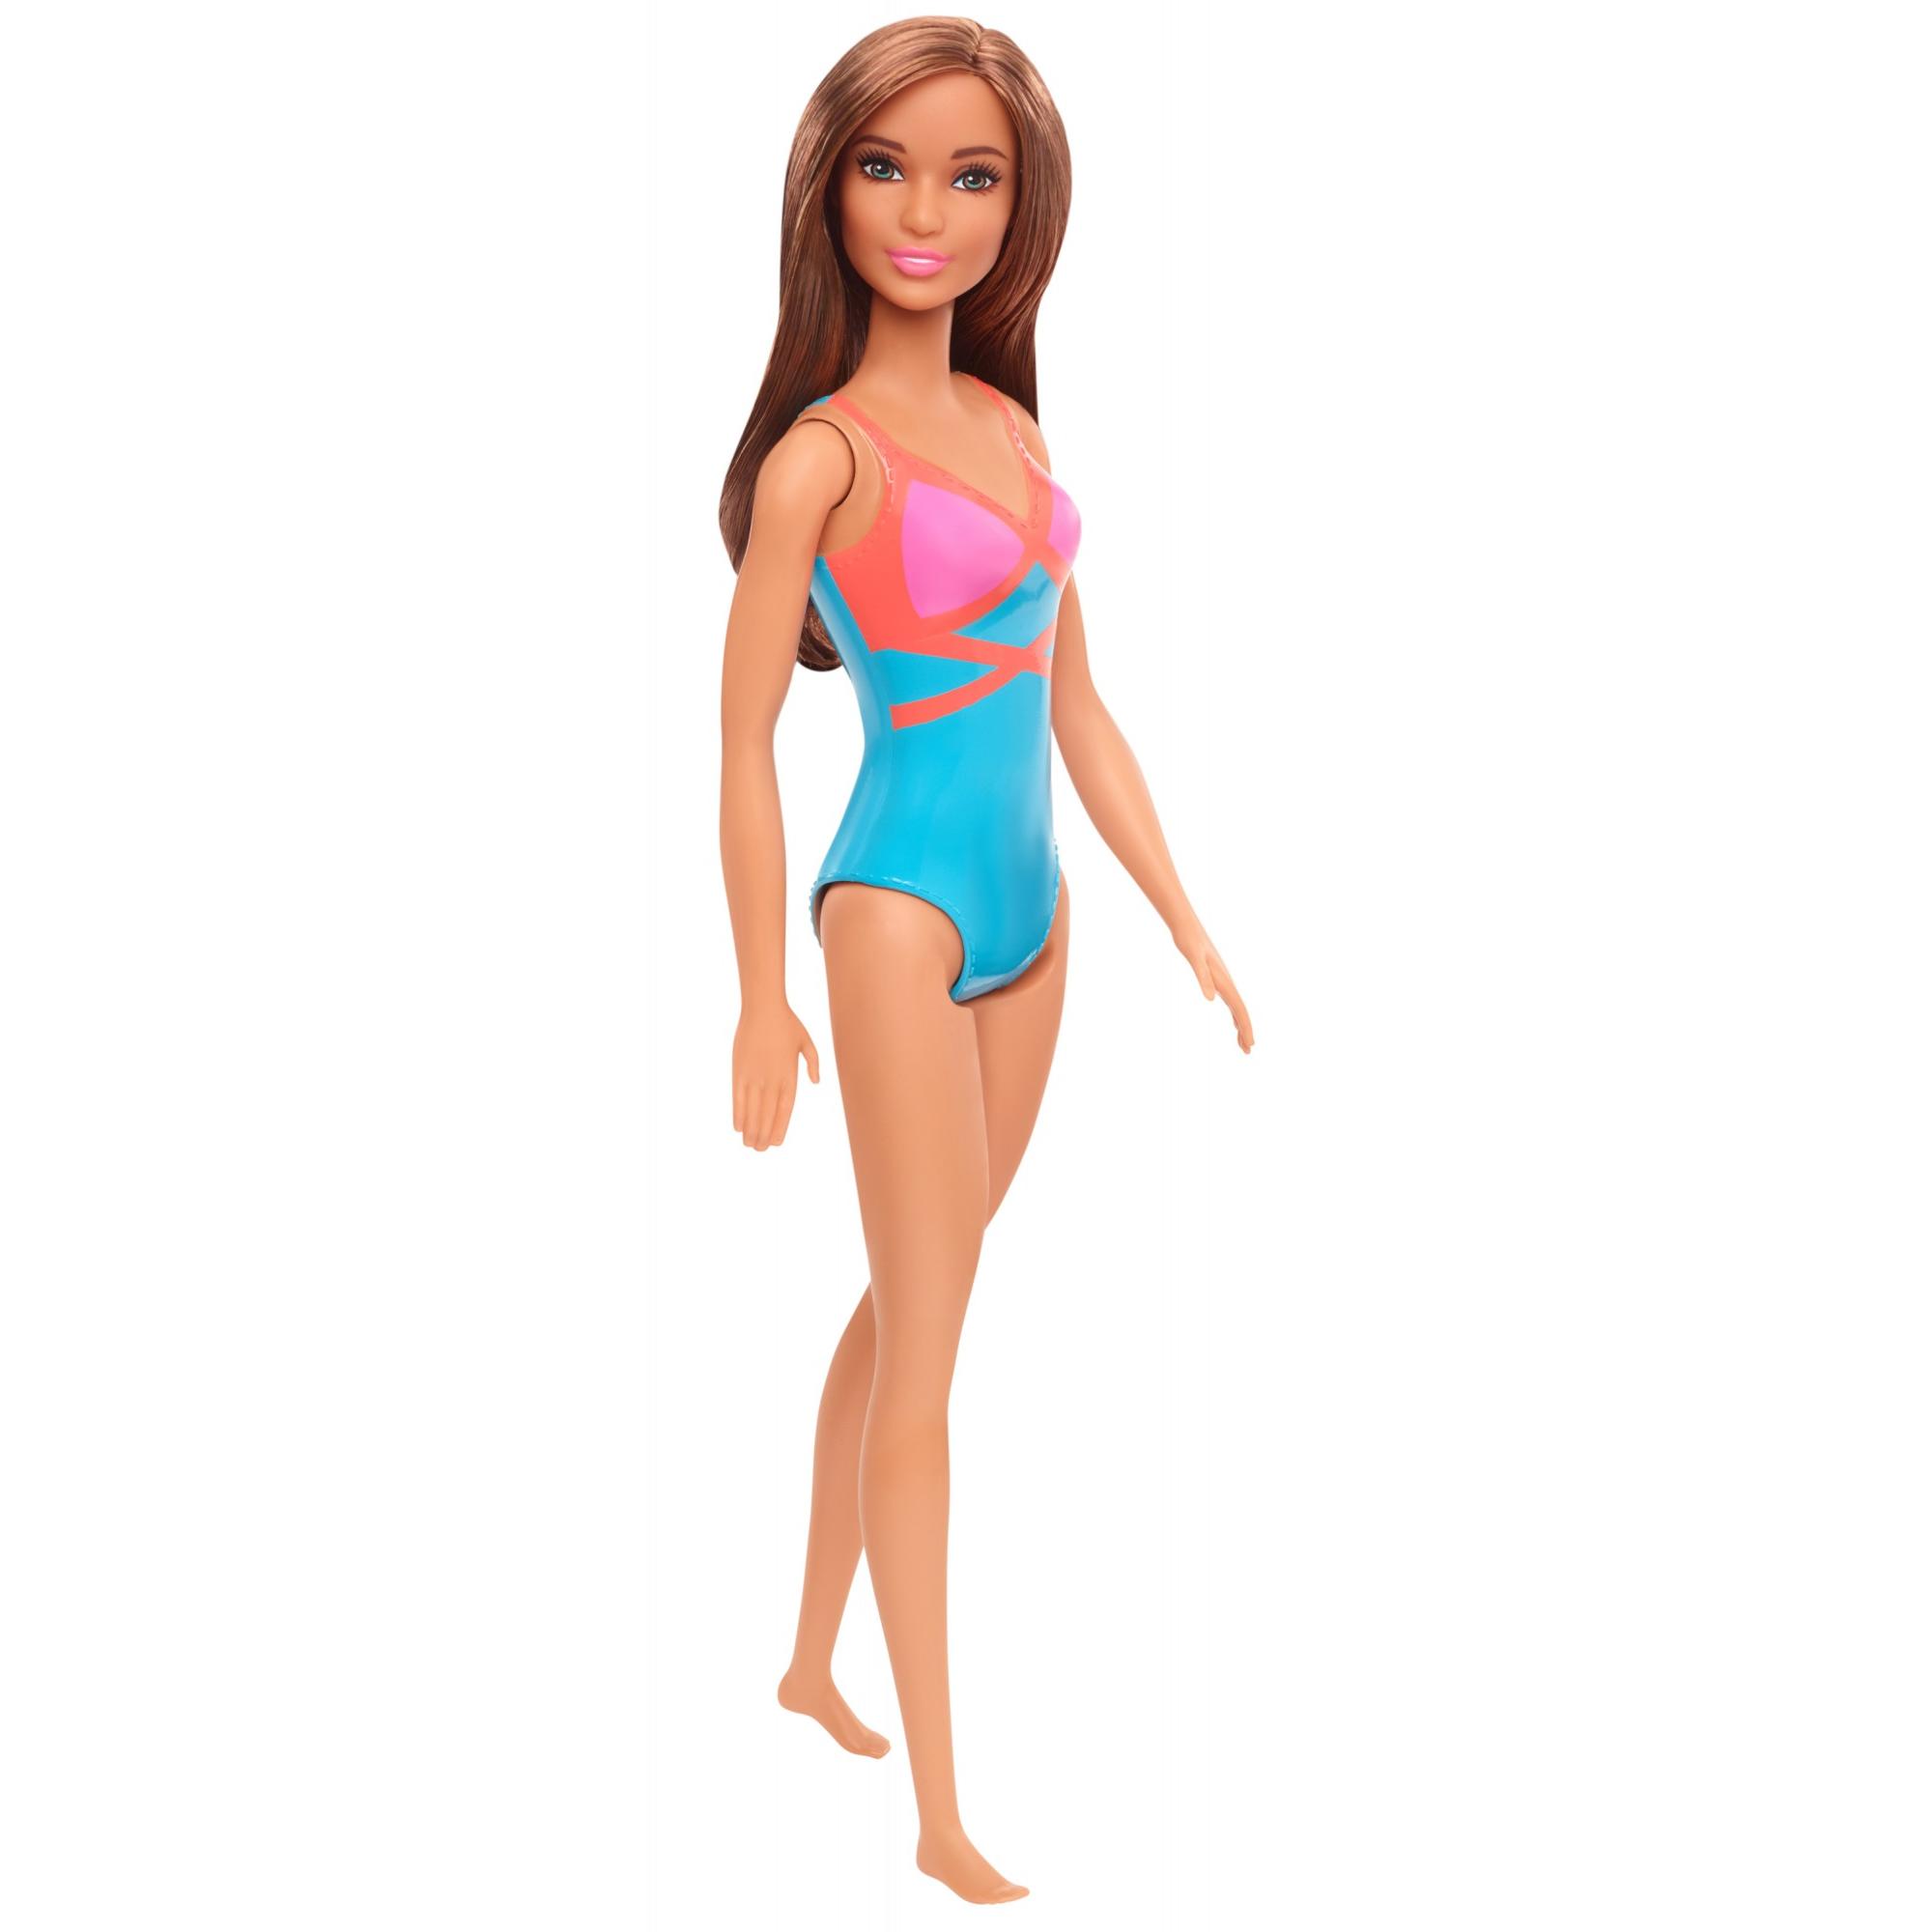 Barbie Doll, Brunette, Wearing Swimsuit, For Kids 3 To 7 Years Old, Brunette - image 1 of 6